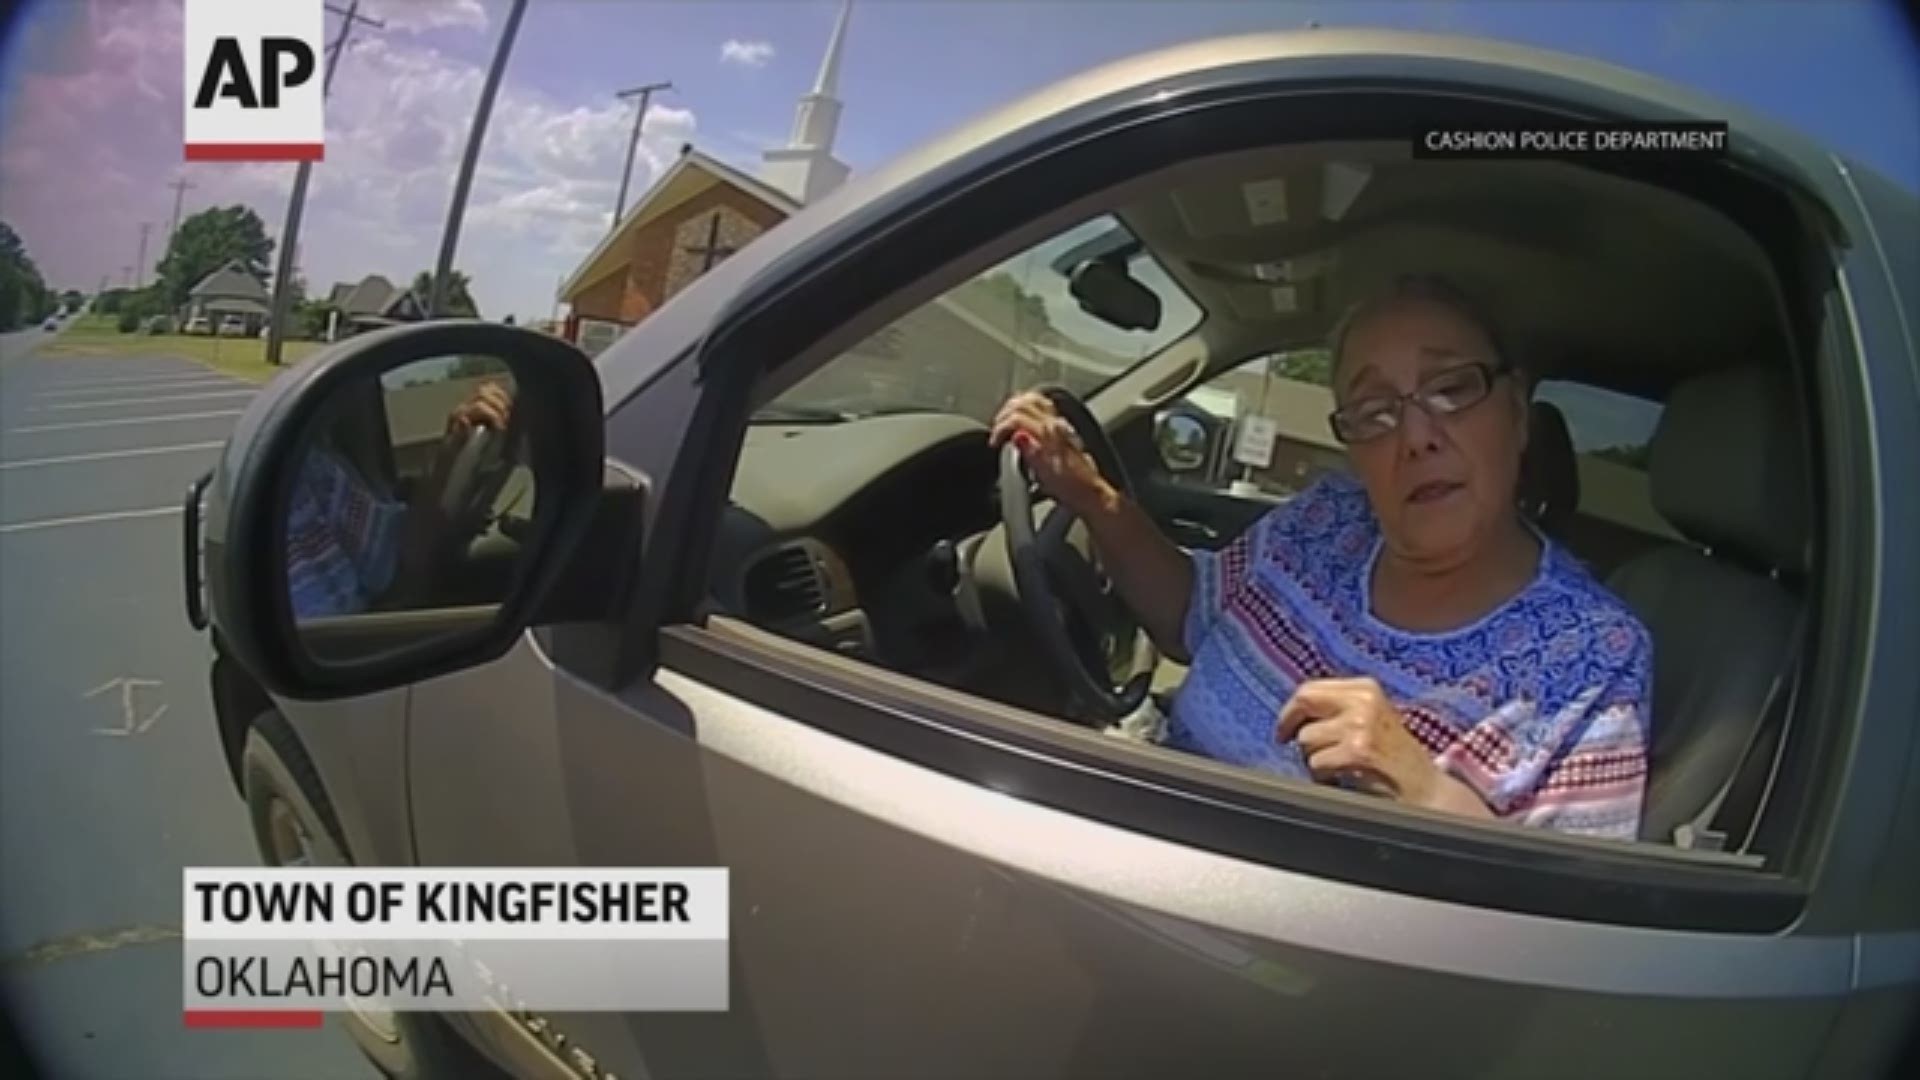 Body camera video shows a police officer using a stun gun on a 65-year-old Oklahoma woman. She was stopped for a broken taillight.